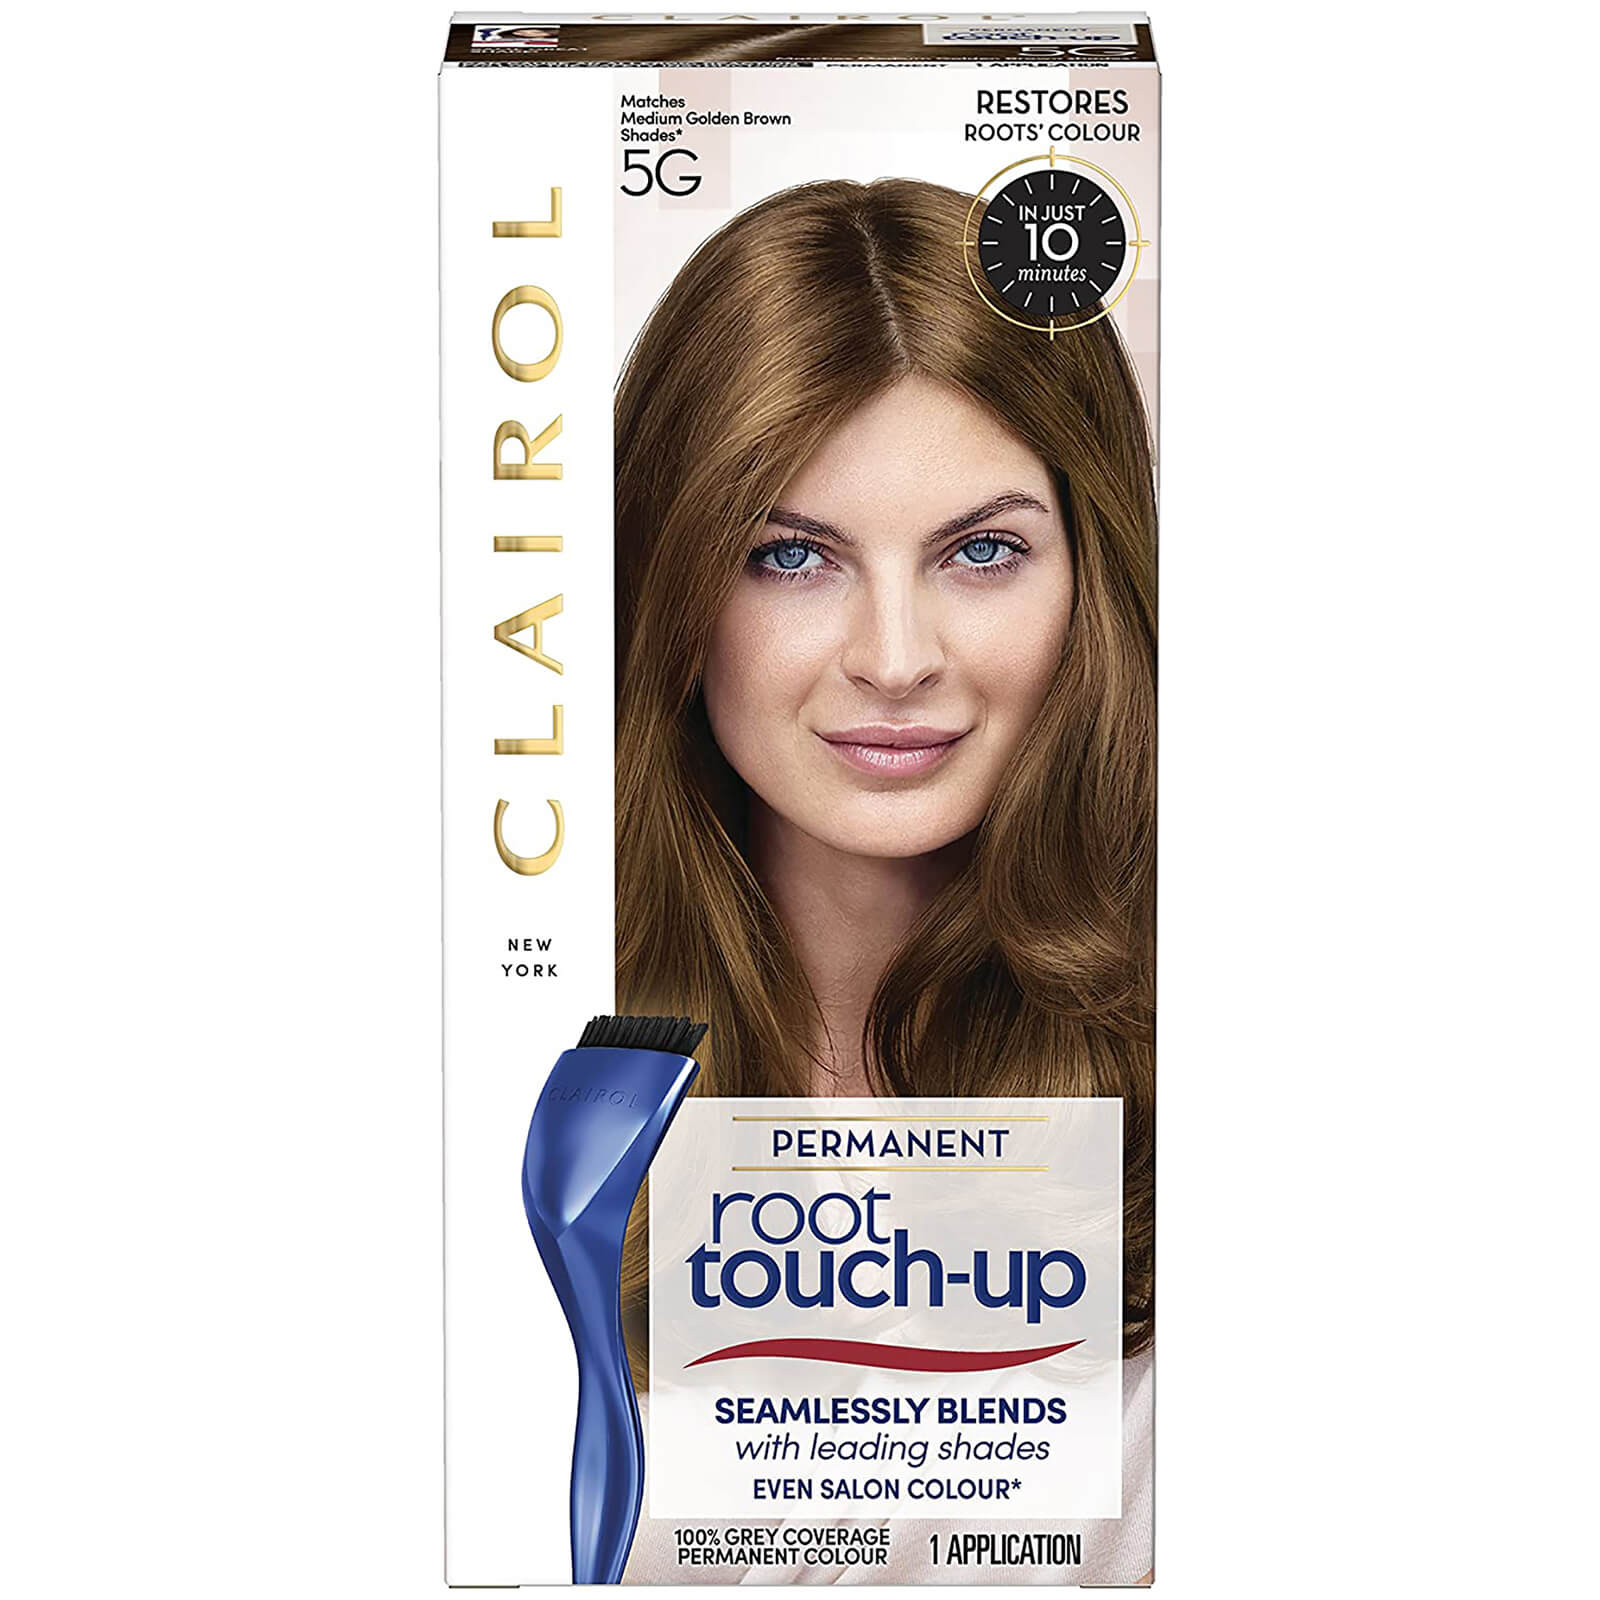 Clairol Root Touch-Up Permanent Hair Dye Long-lasting Intensifying Colour with Full Coverage 30ml (Various Shades) - 5G Medium Golden Brown